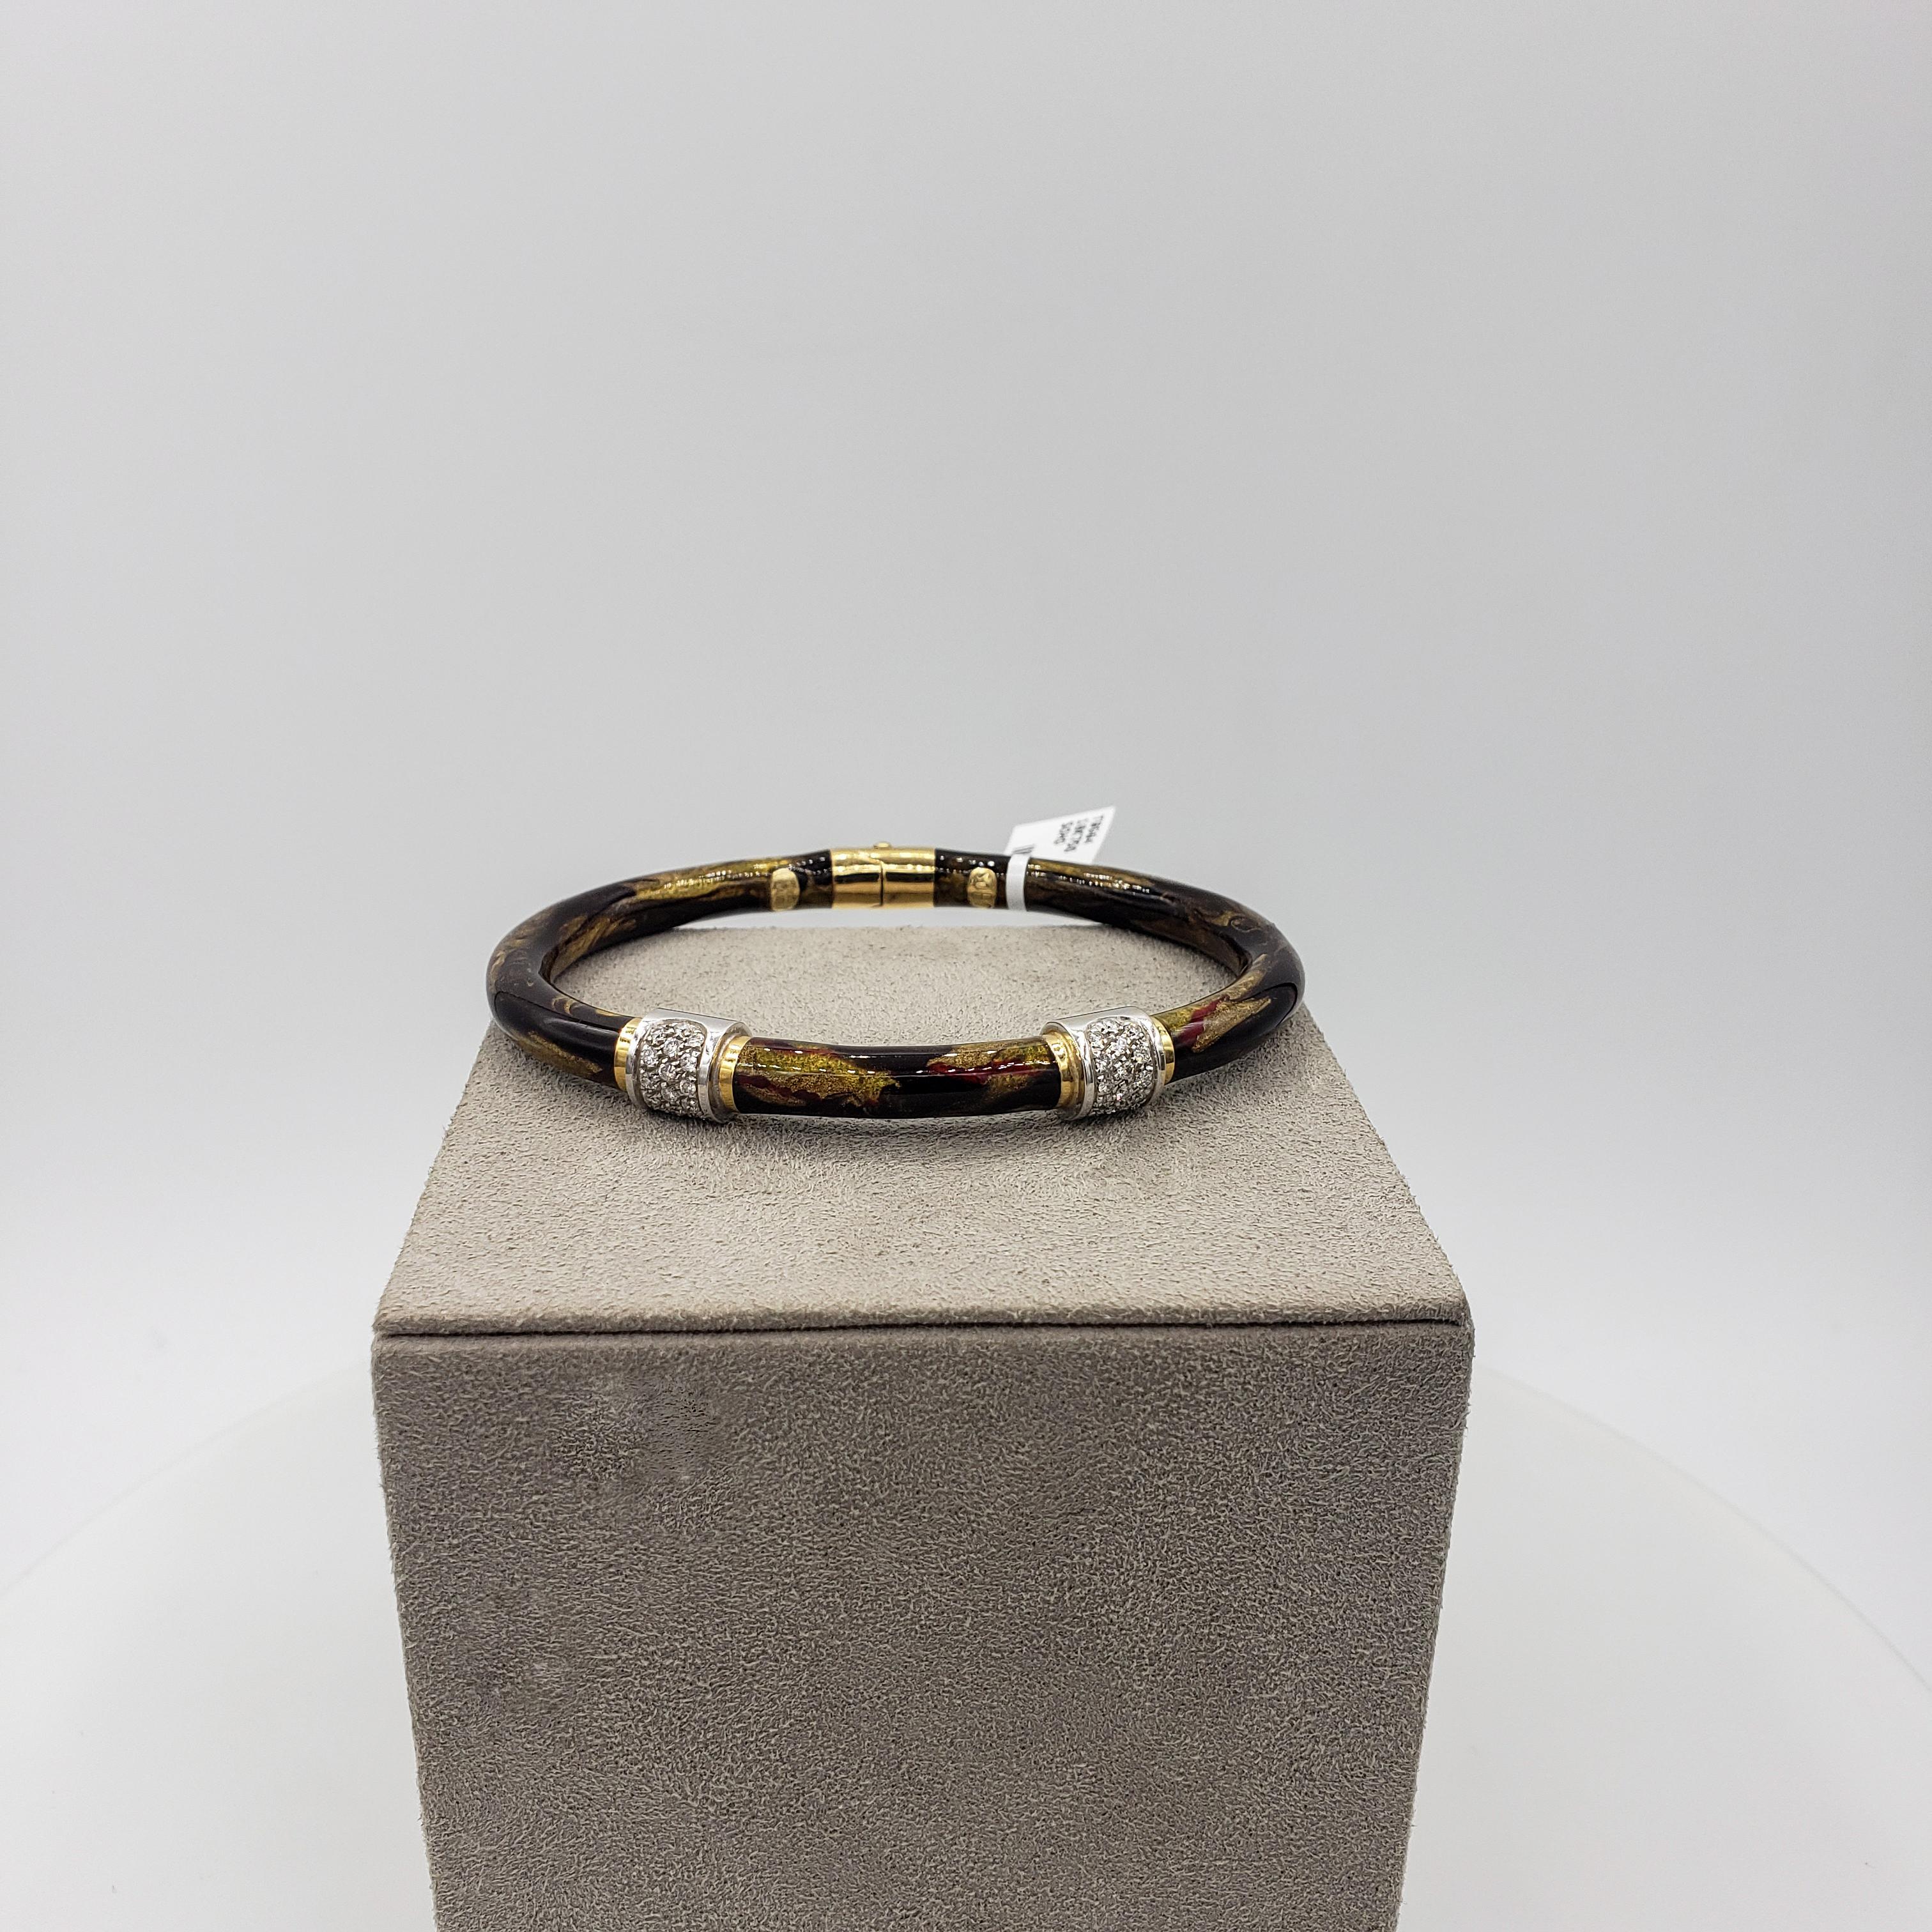 Soho Jewelry 18K Yellow Gold, Enamel and Diamond Bangle Bracelet In Excellent Condition For Sale In New York, NY